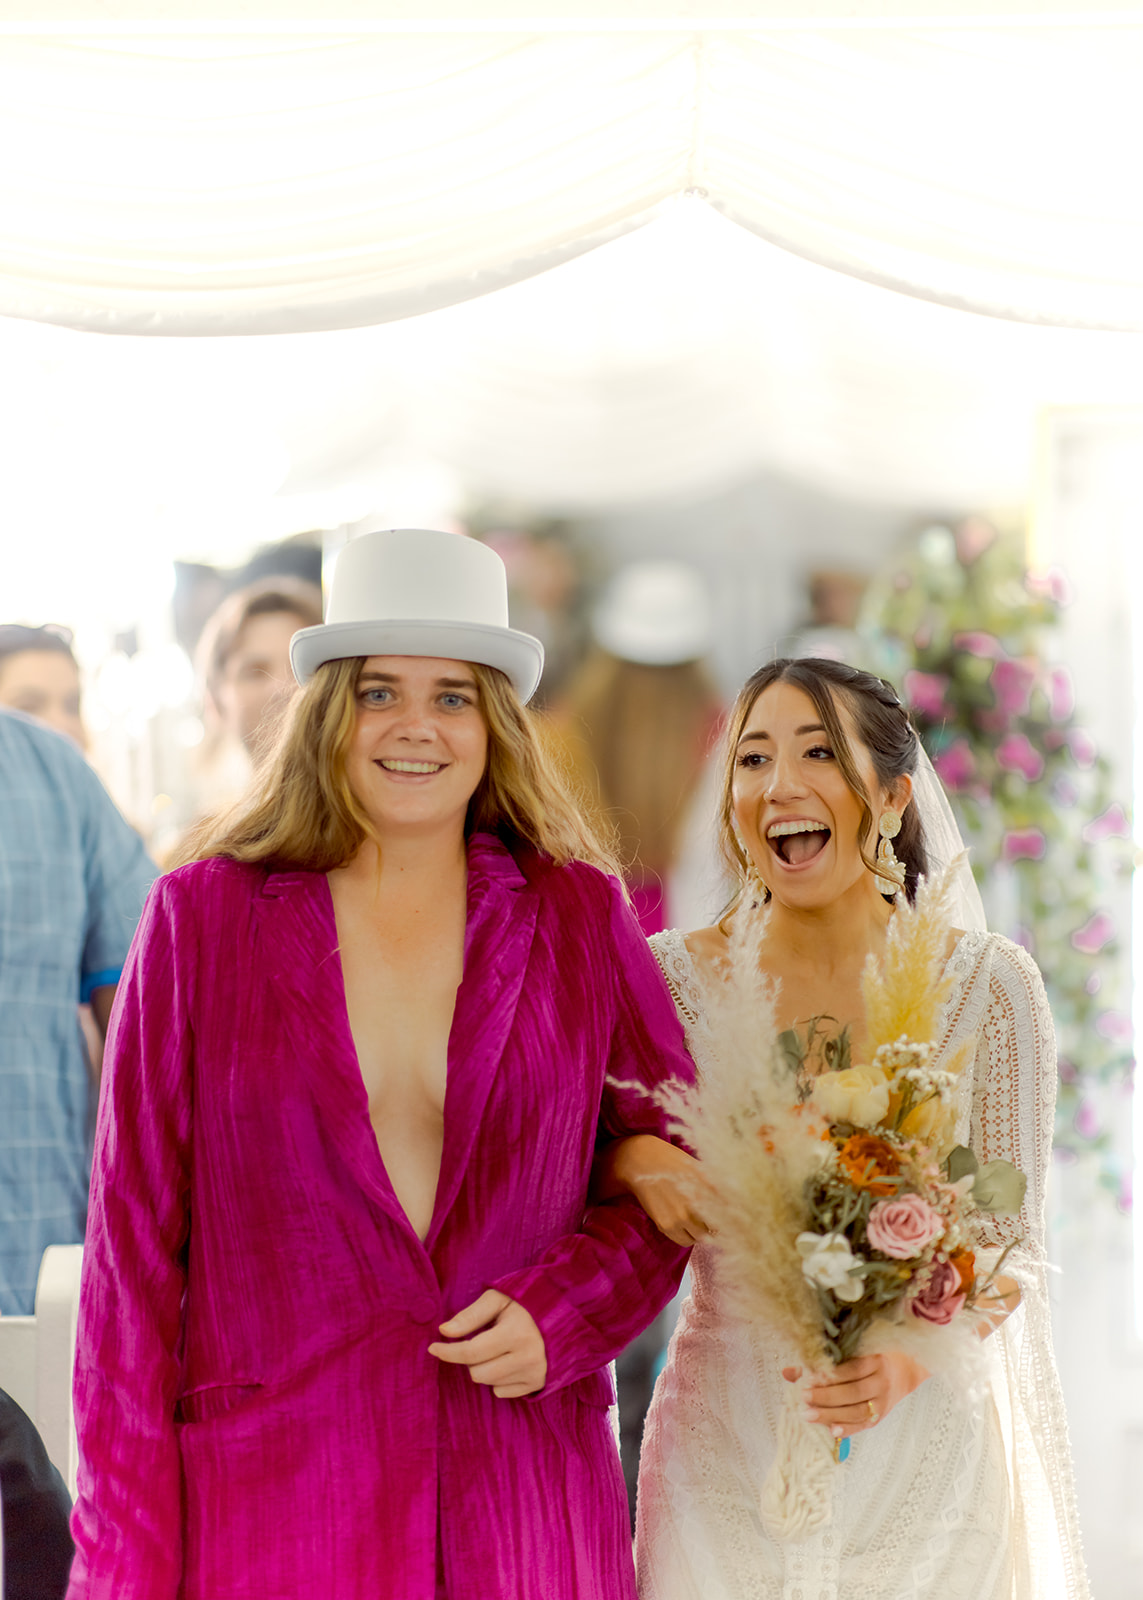 Bride walking down aisle with guest dressed in 70's attire 